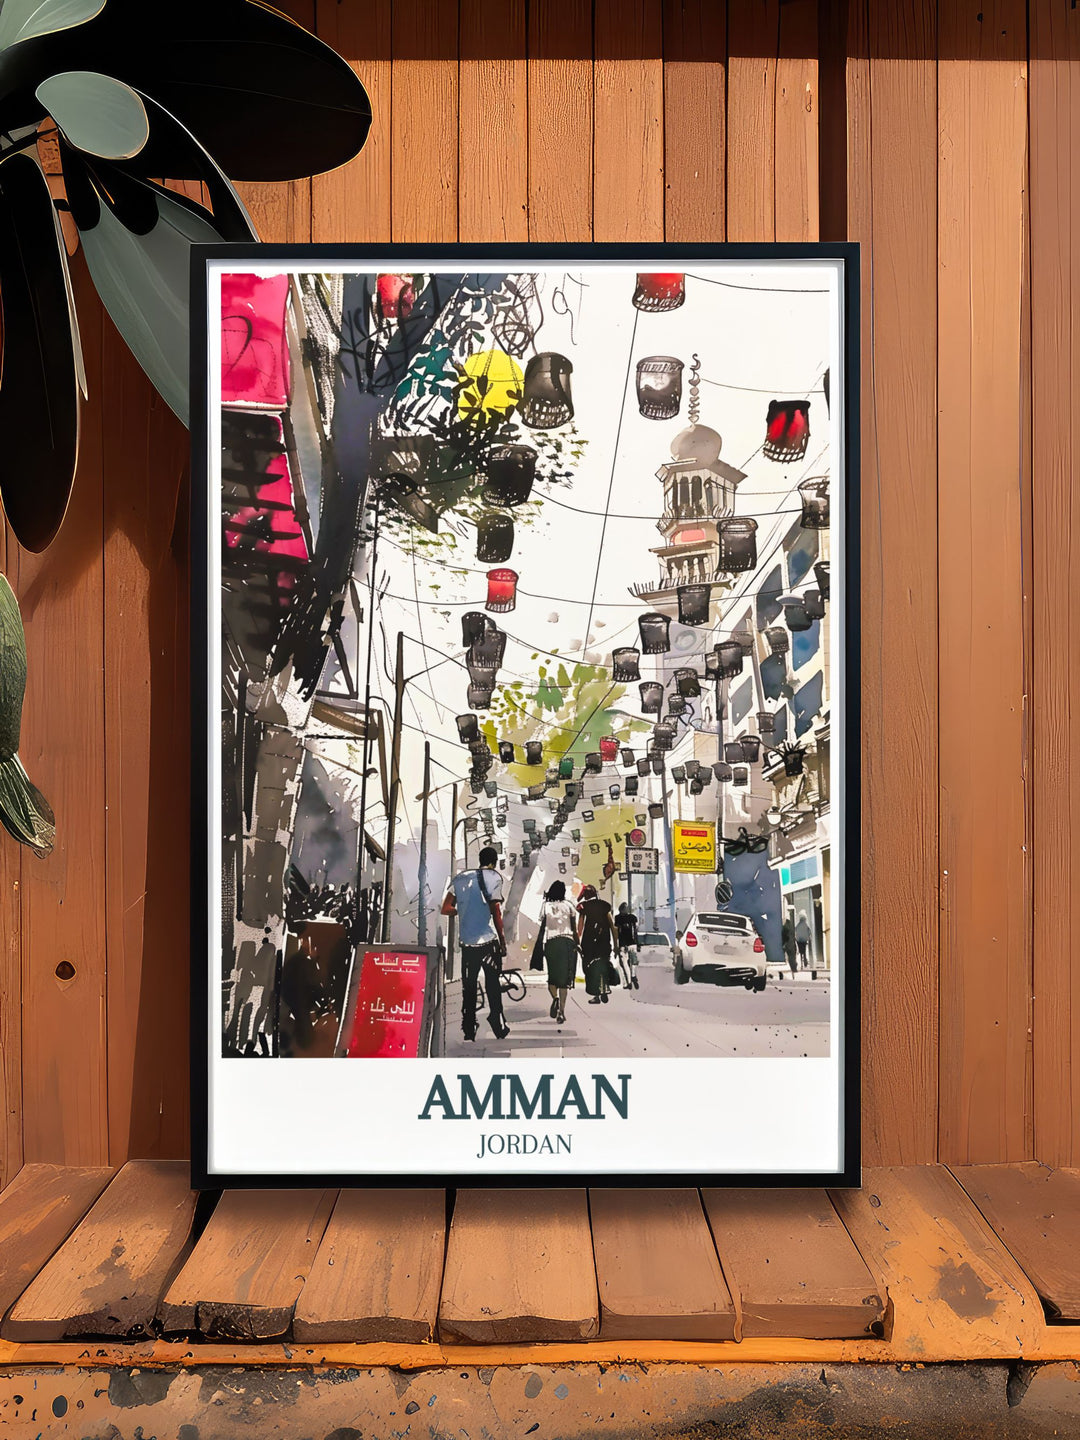 Unique Amman Wall Art featuring Rainbow Street King Abdullah Mosque bringing the historical and modern blend of Amman to your living space through exquisite artwork